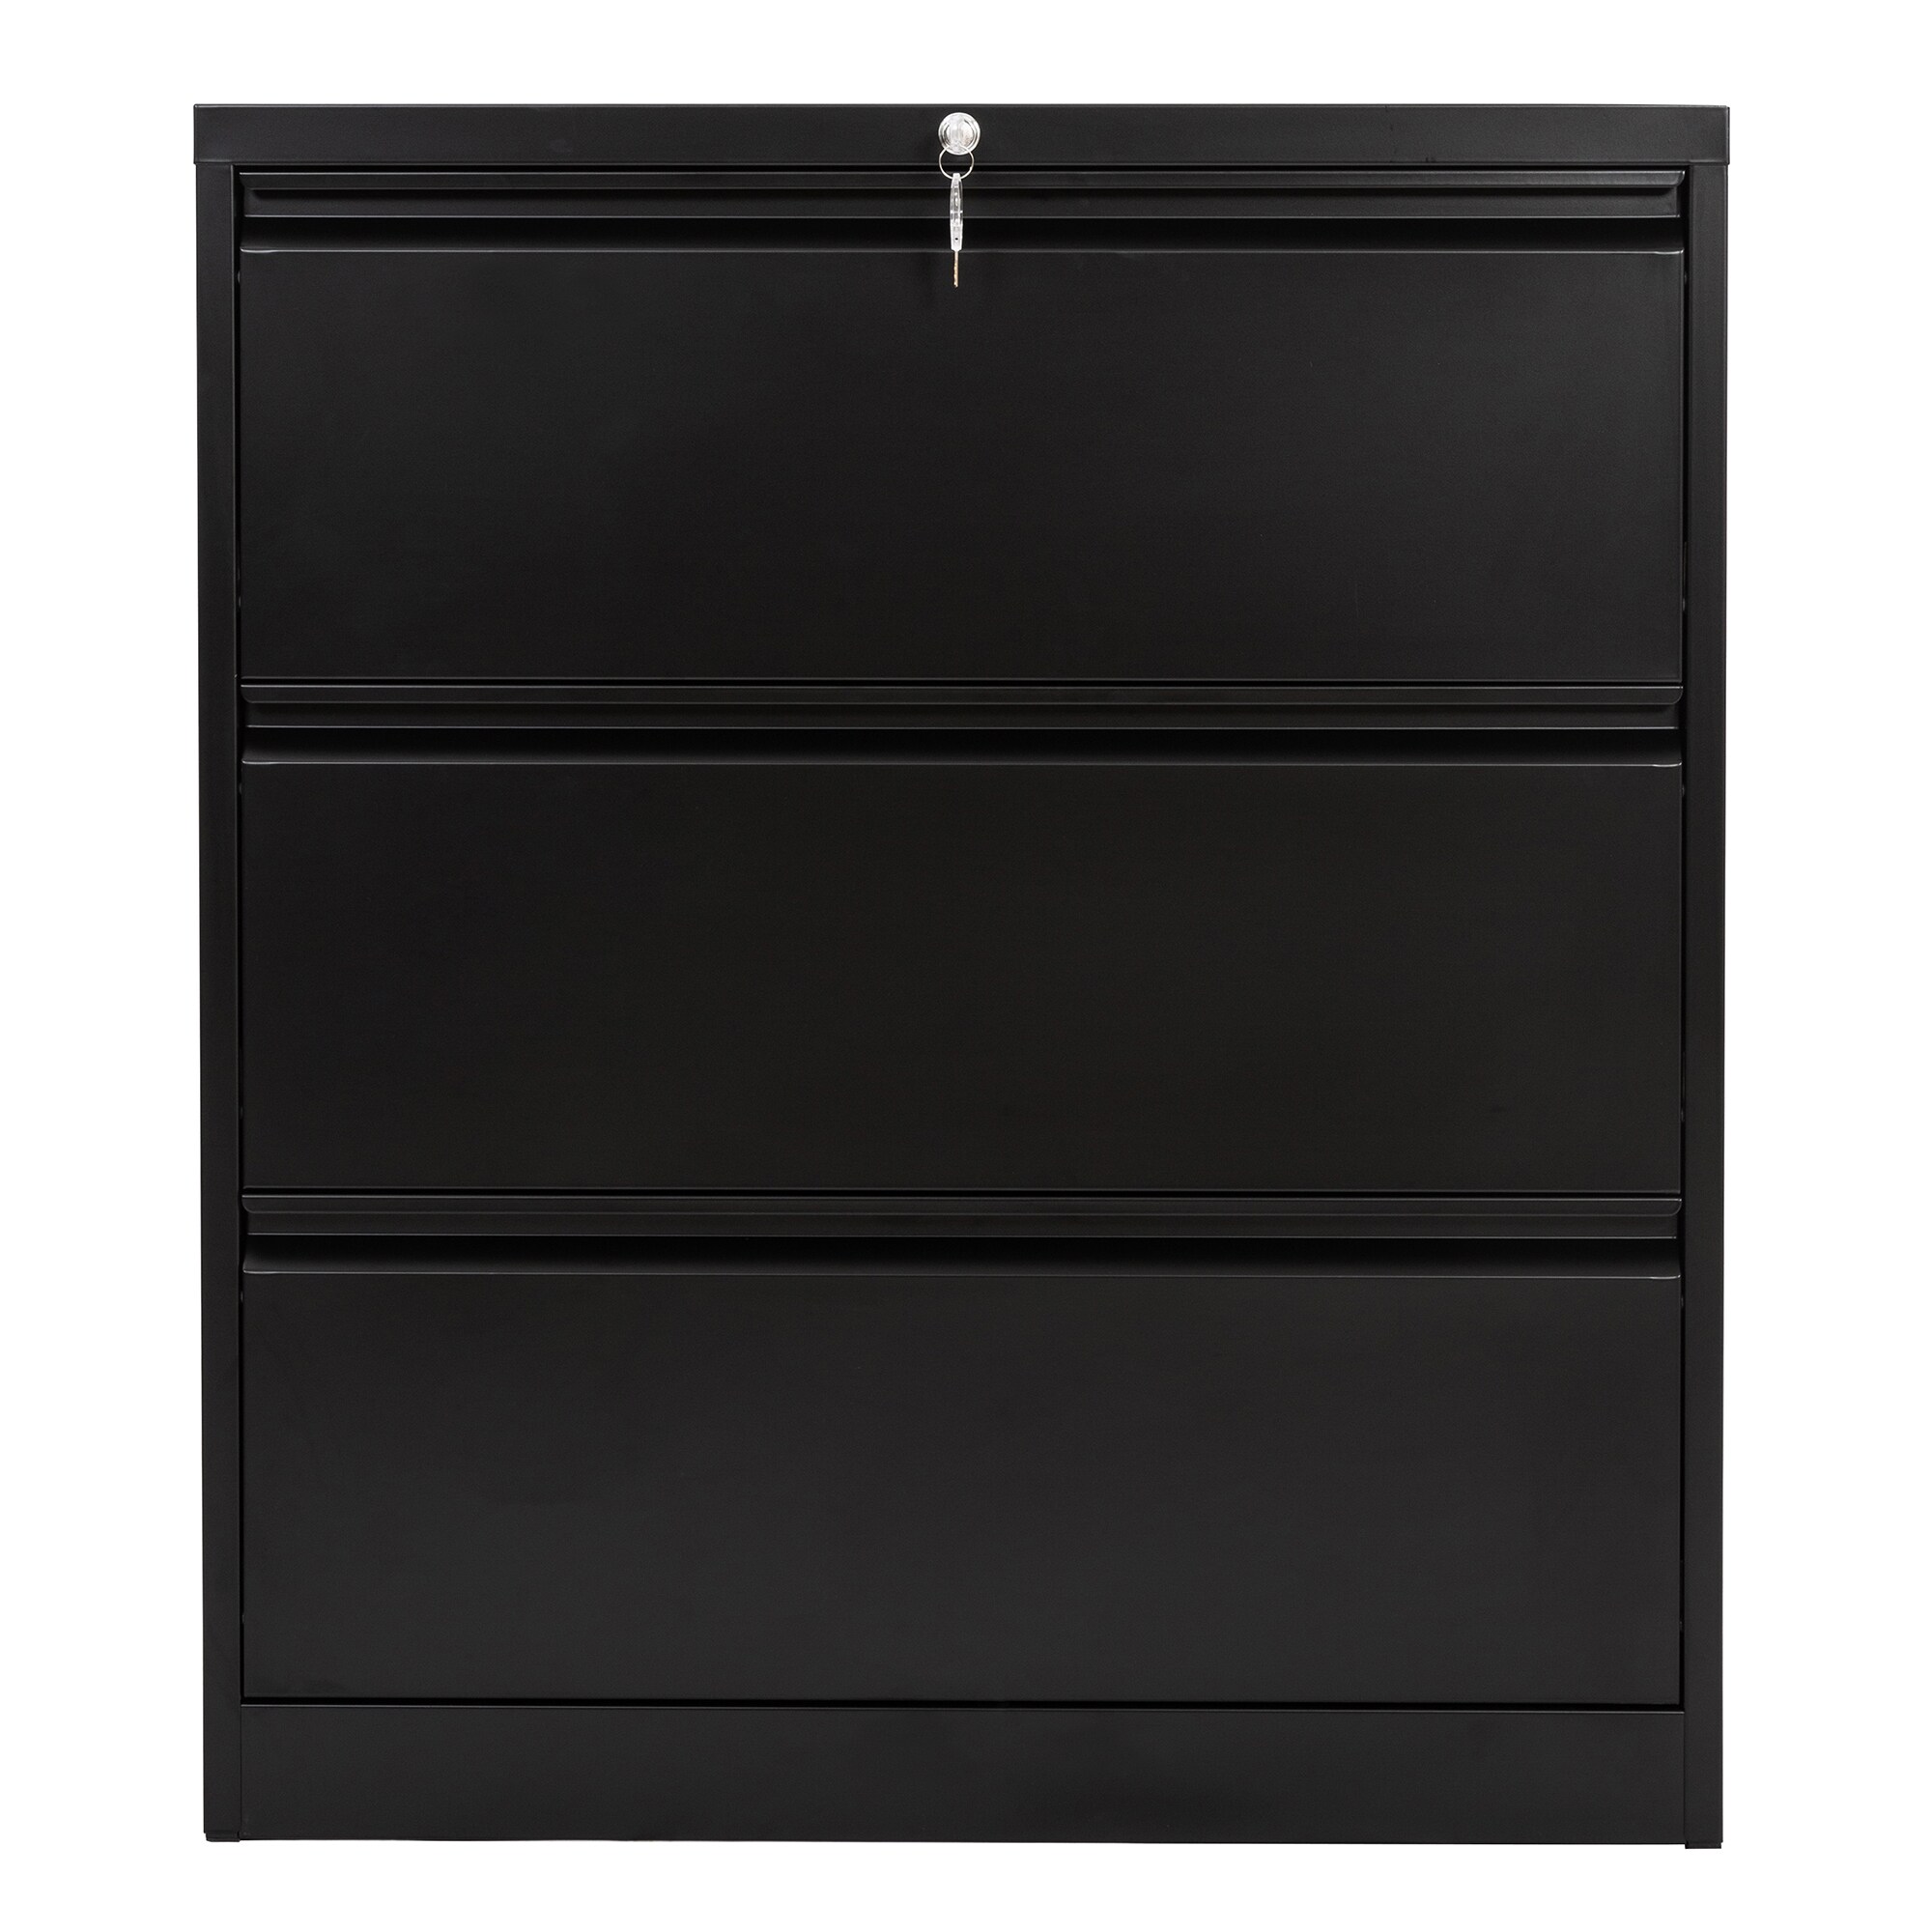 SUXXAN Lateral Filing Cabinet,Metal Filing Cabinet with 3 Drawer,Locking Home Office Steel Files Cabinet with Letter/Legal Size,Anti-tilt Structure,Assembly Required 40.15 H x 35.43 W x 18.11 D 